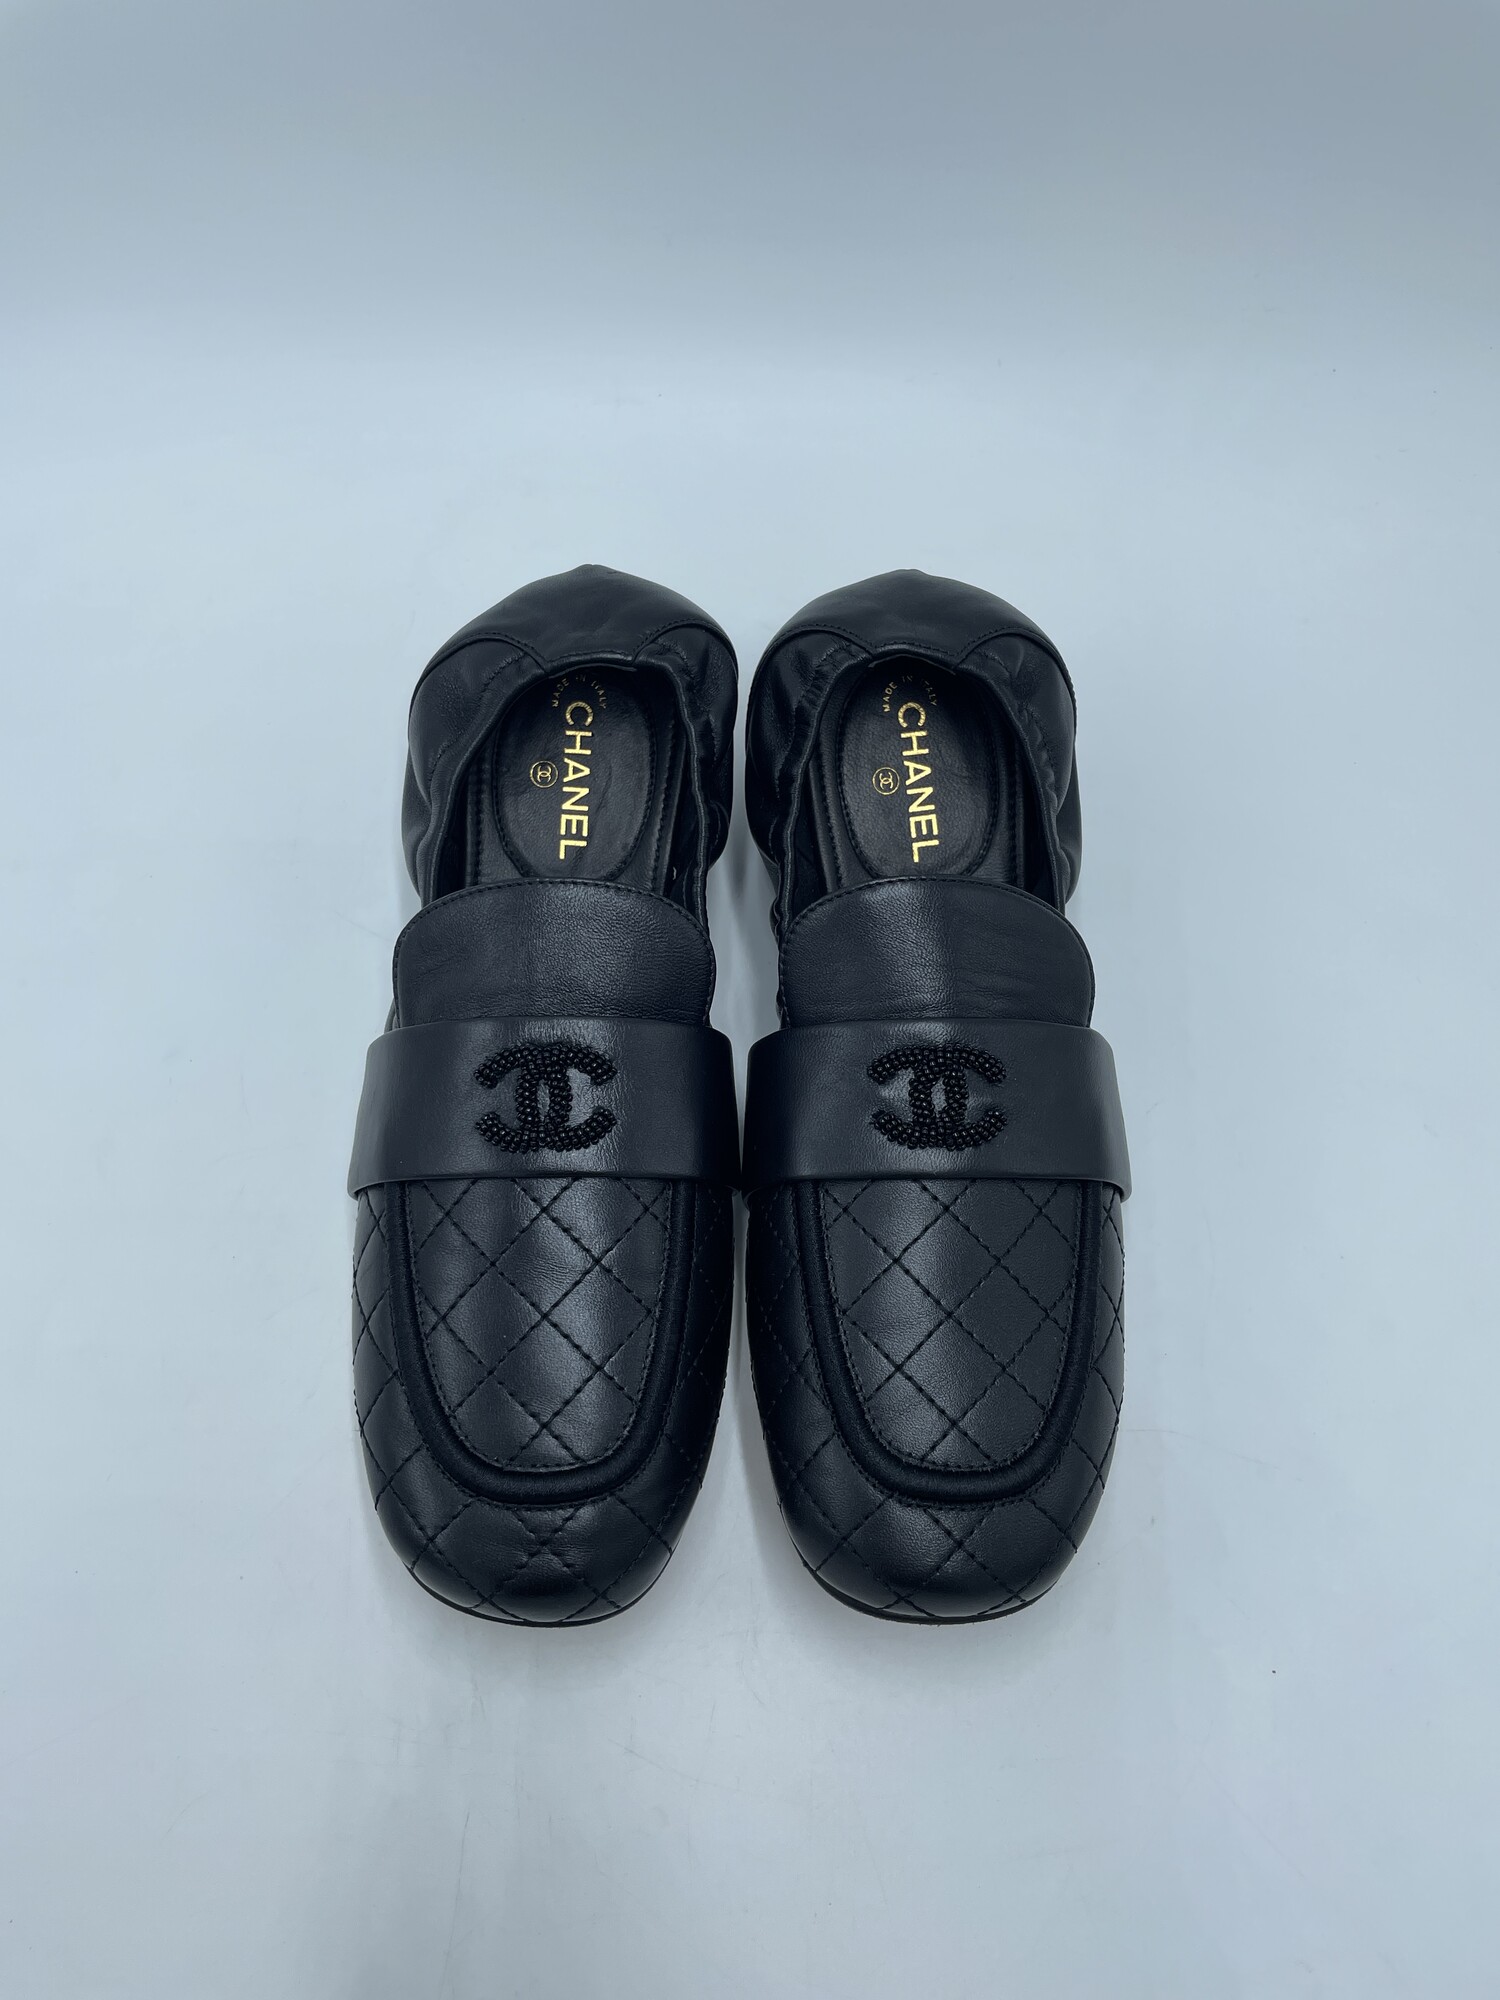 Chanel 2019 CC Quilted Leather Loafer<br />
Color:  Black<br />
 Size: 38<br />
Condition: Like New